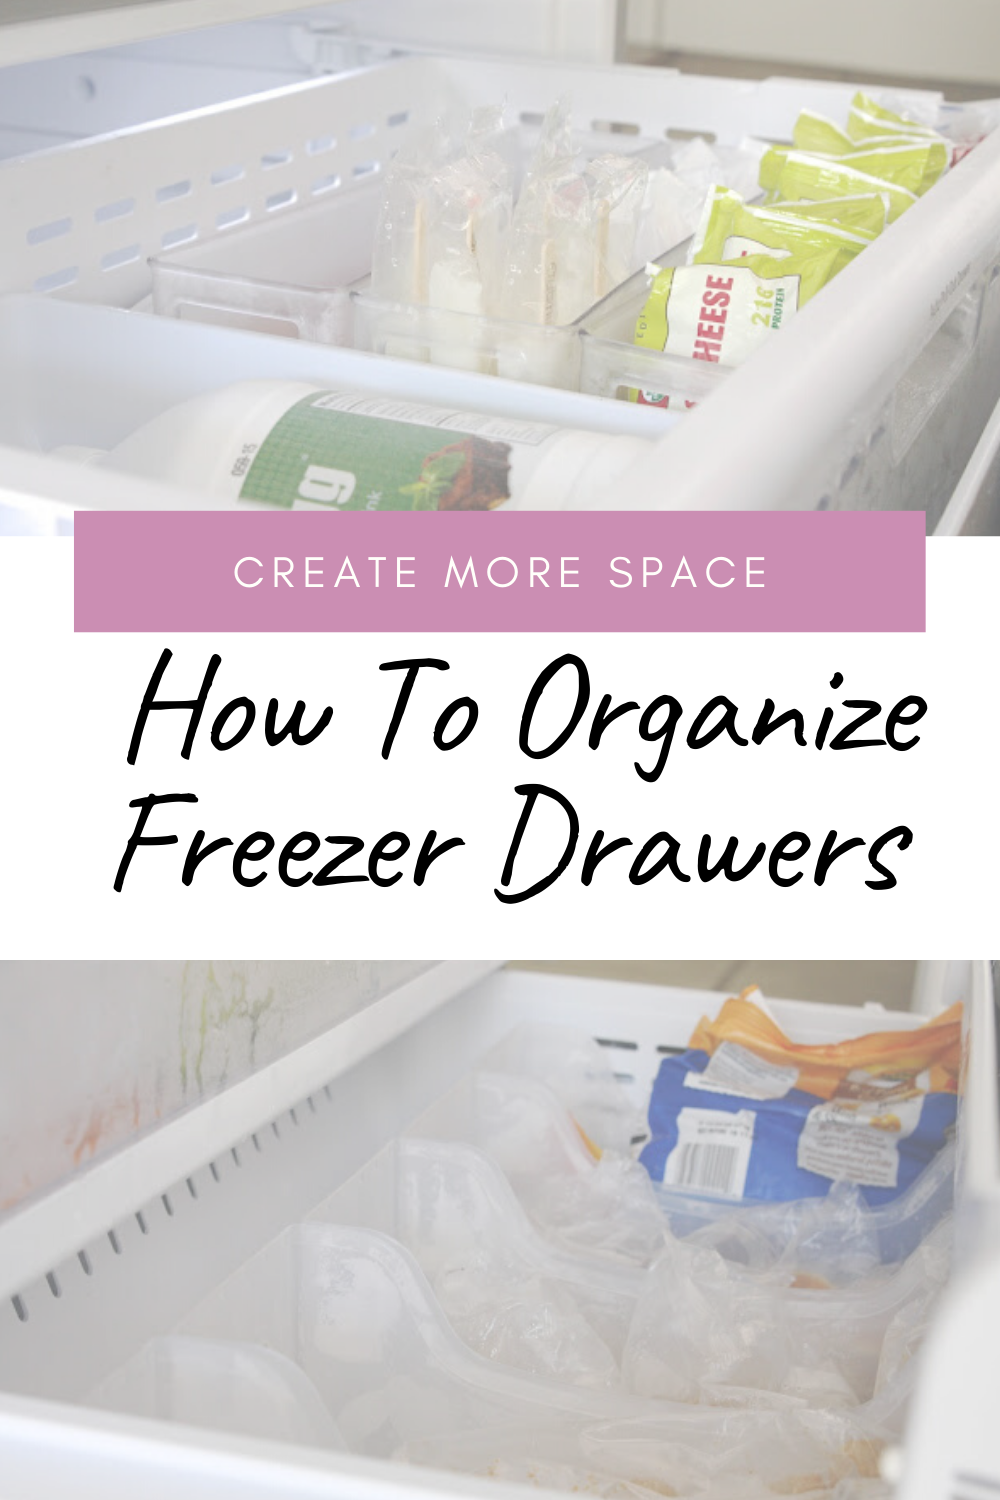 3 Use one drawer per food category